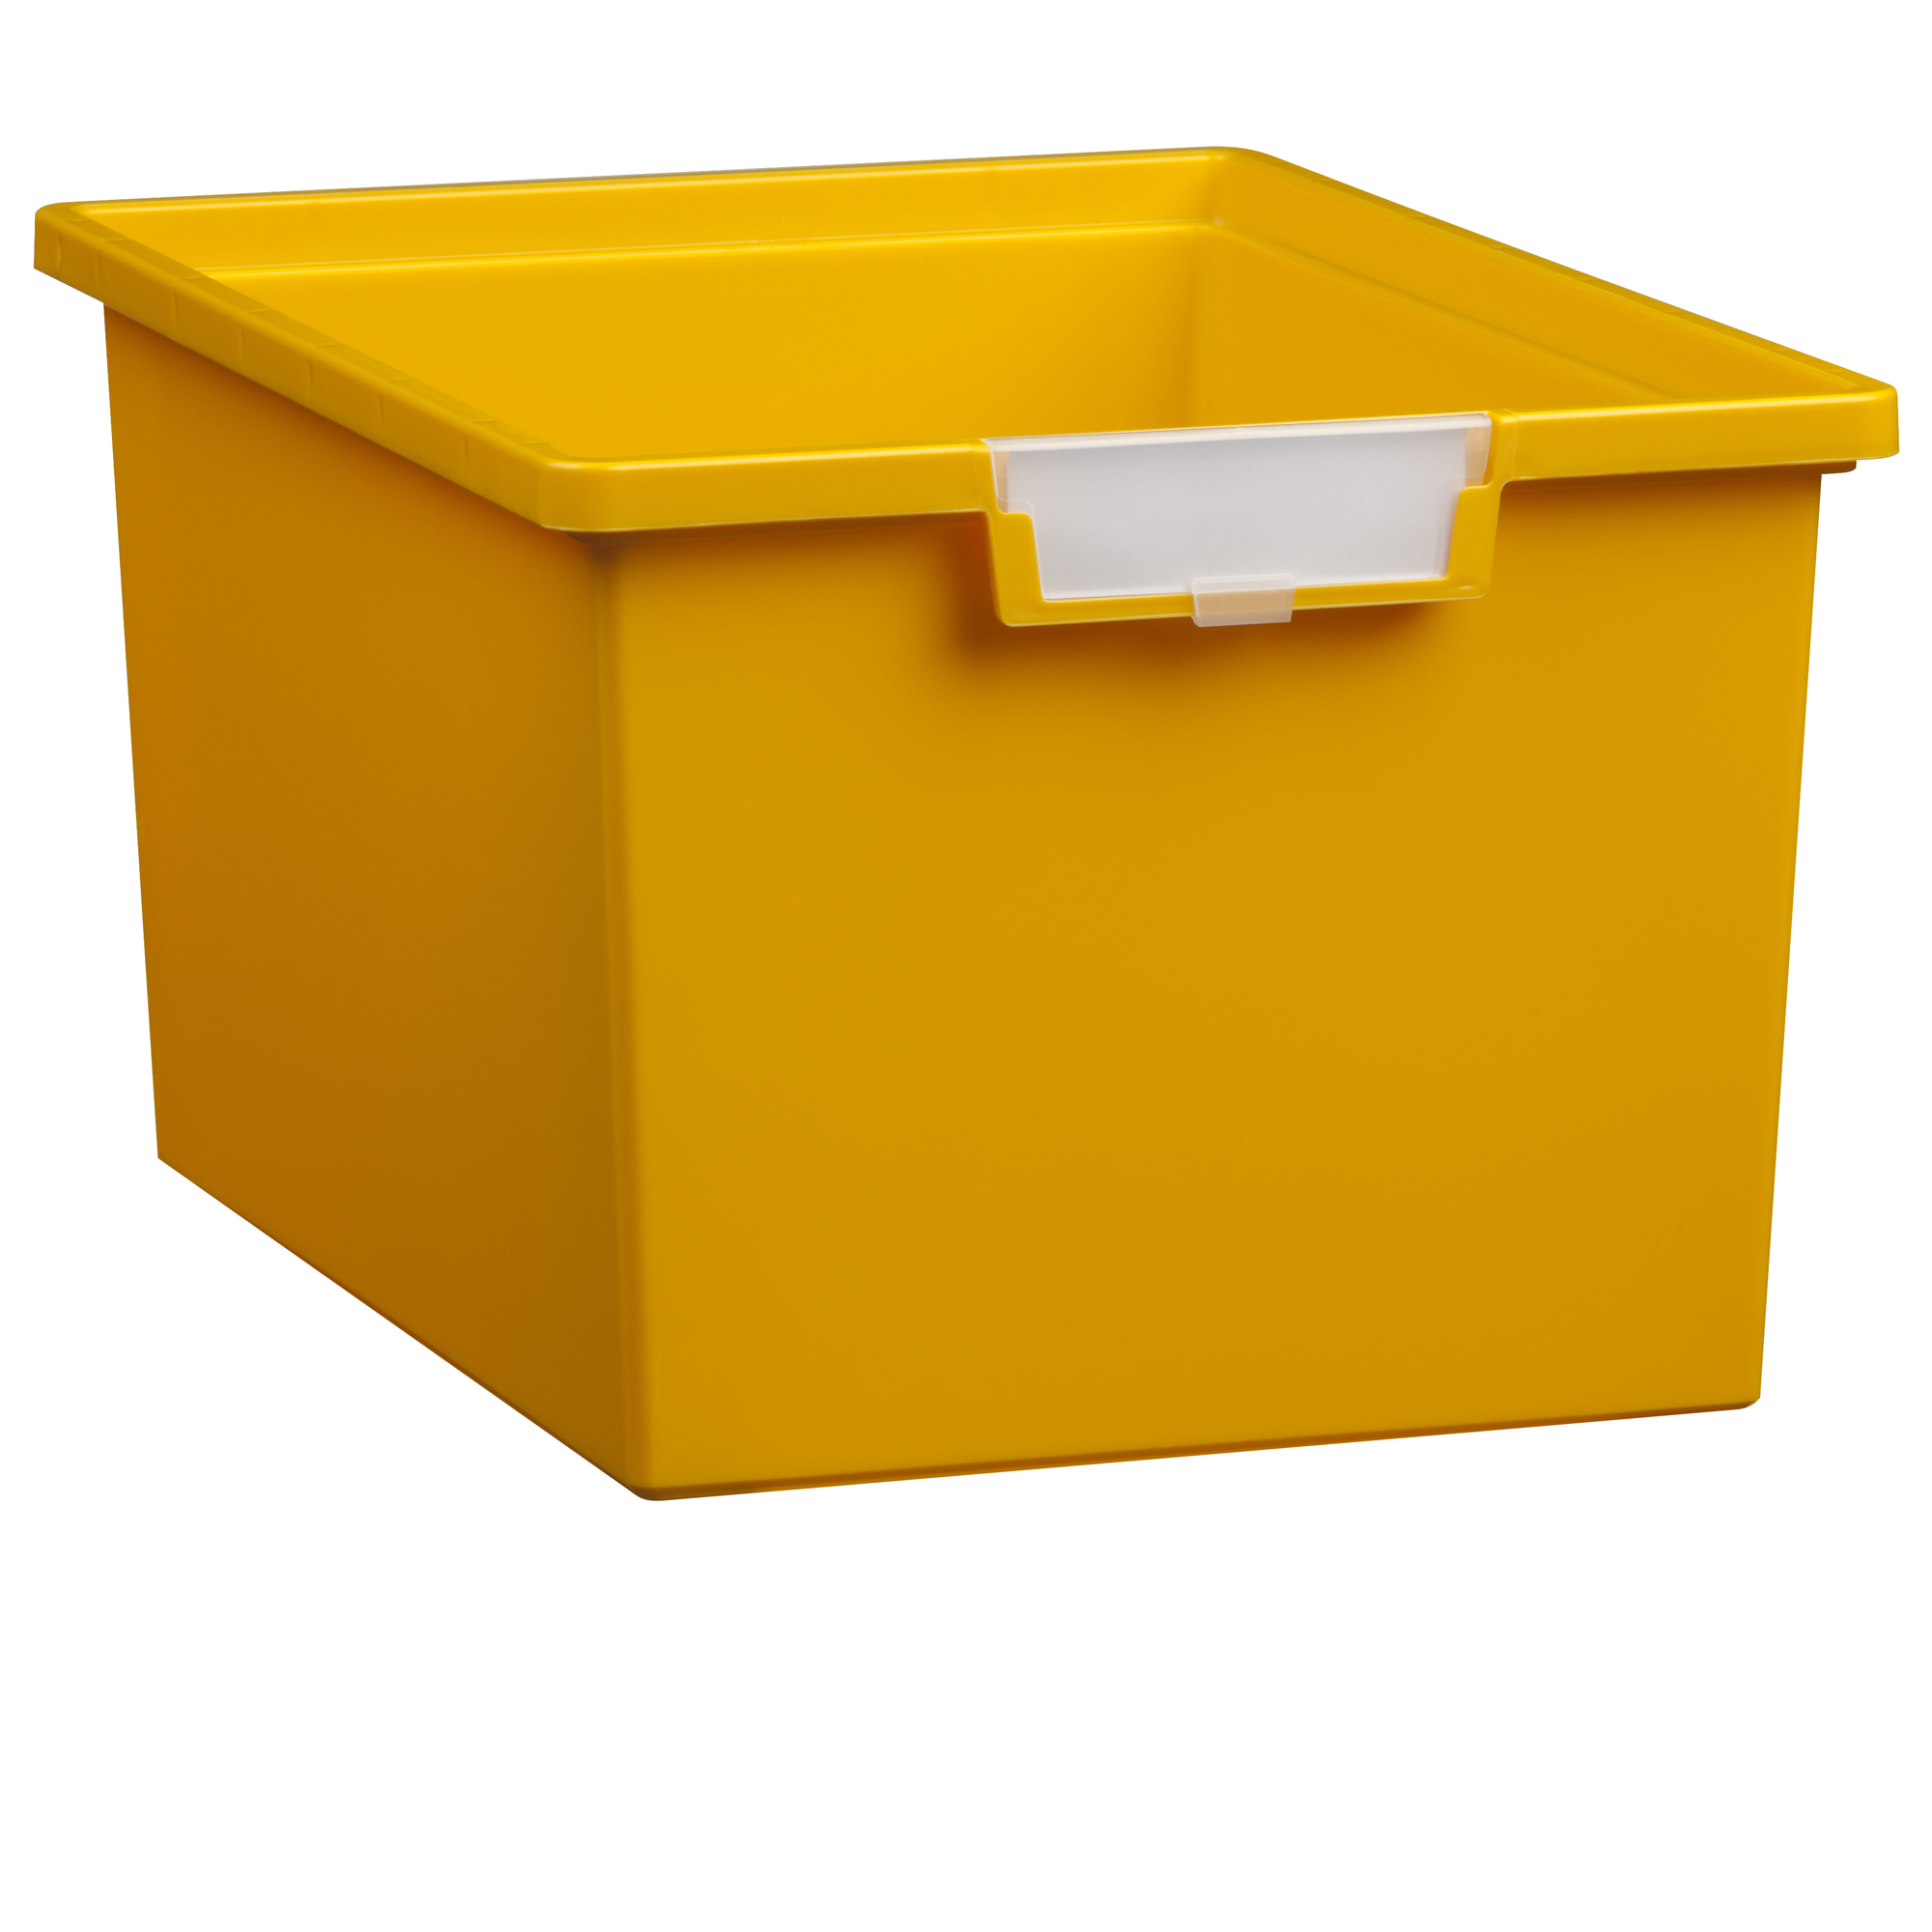 Certwood StorWerks, Slim Line 9Inch Tray in Primary Yellow-3PK, Included (qty.) 3 Height 9 in, Model CE1953PY3